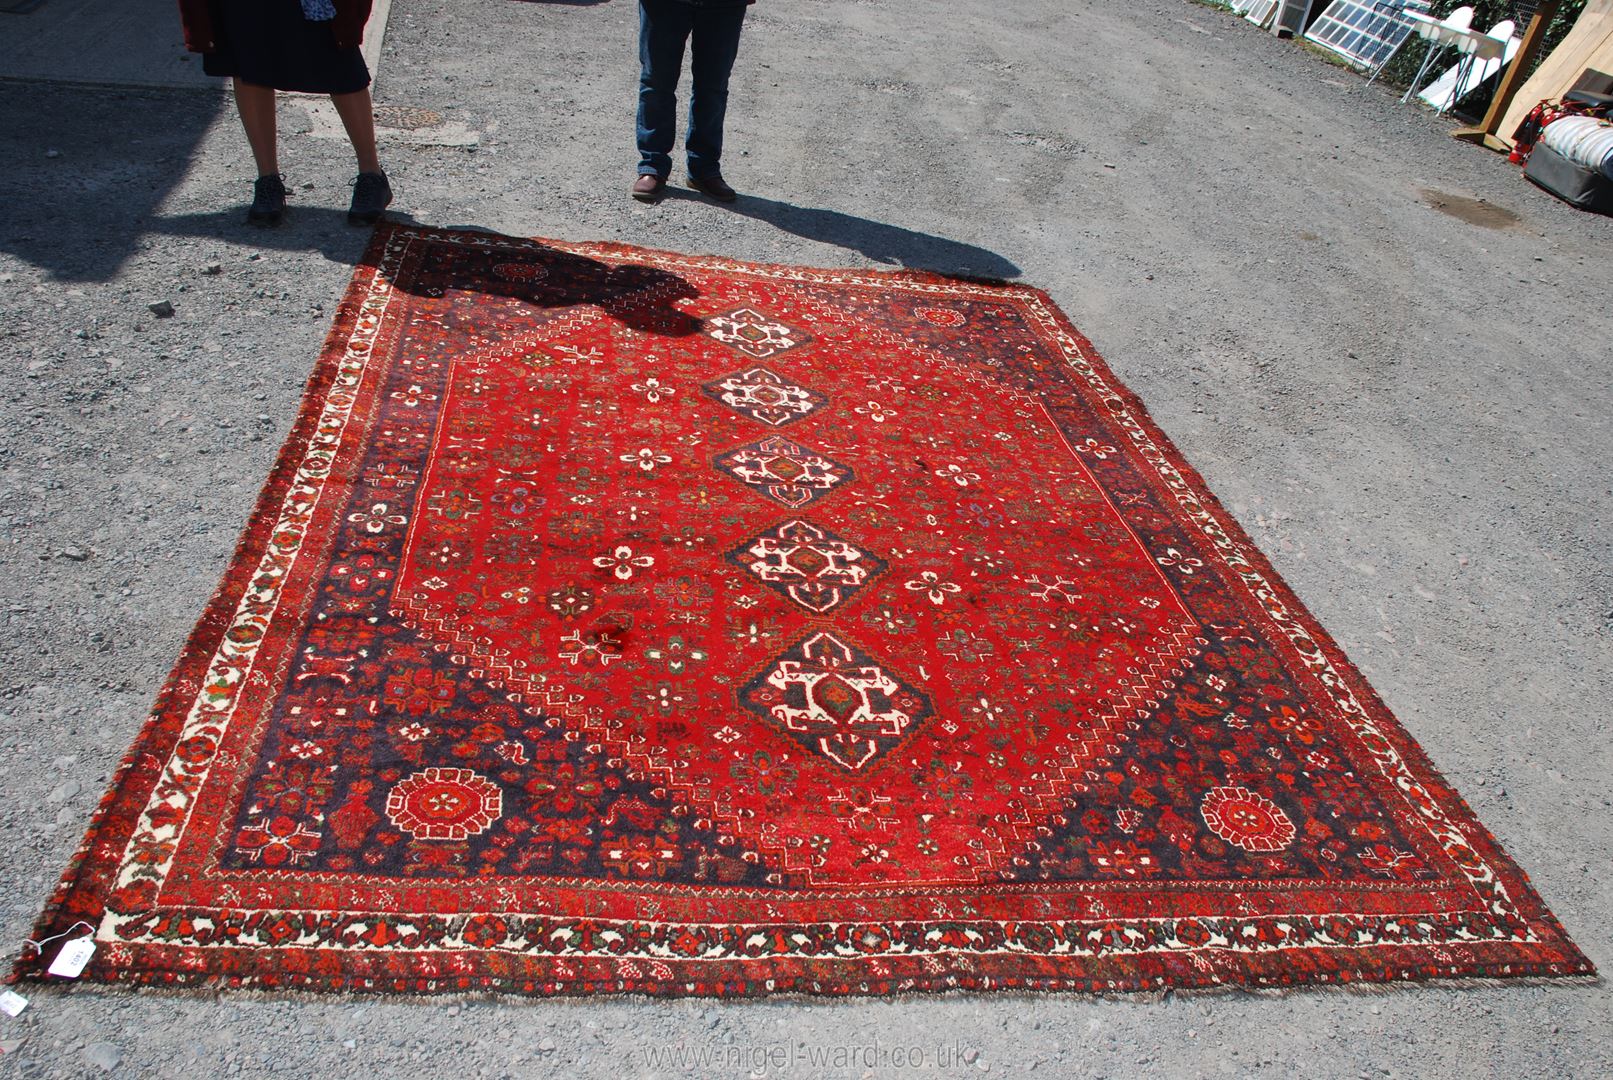 A large burgundy, navy and cream bordered, patterned and fringed Carpet, made in Iran, 120'' x 90''. - Image 2 of 2